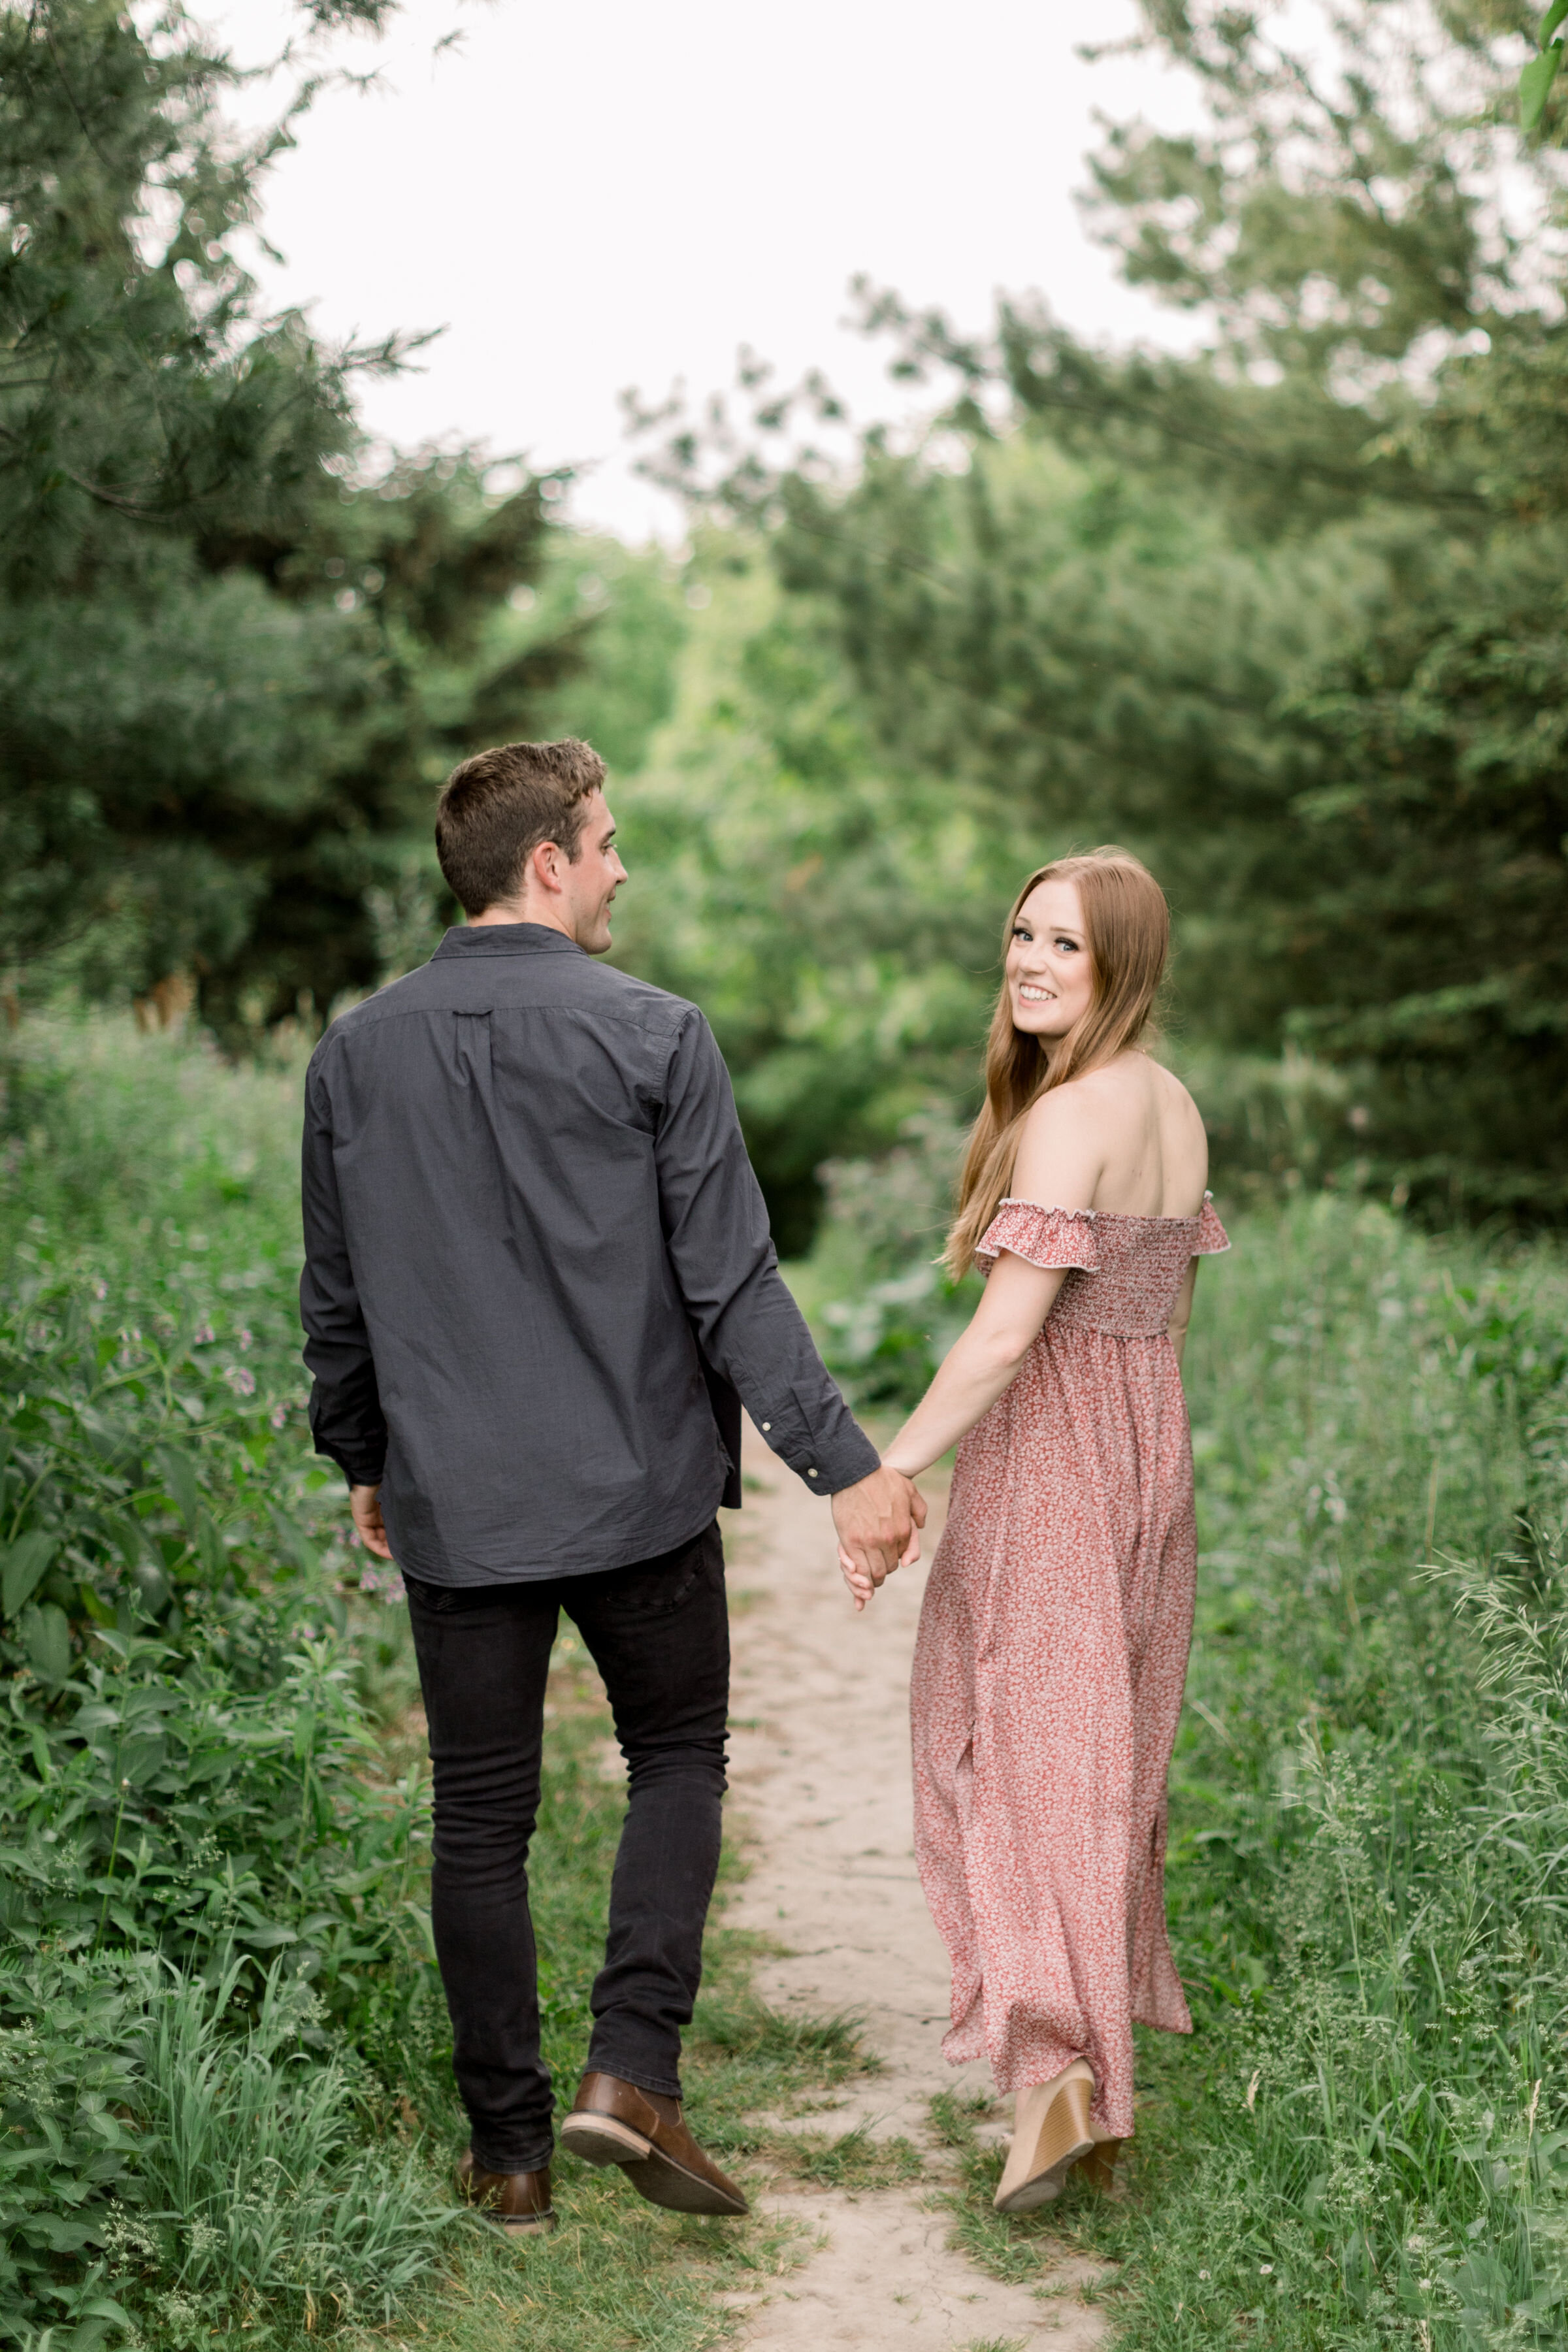  Arboretum, Ottawa photographer, engagement photographer, Chelsea Mason Photography captures this couple from behind while walking down an unpaved clearing together with their arms wrapped around one another. woman looking over her shoulder smiling c